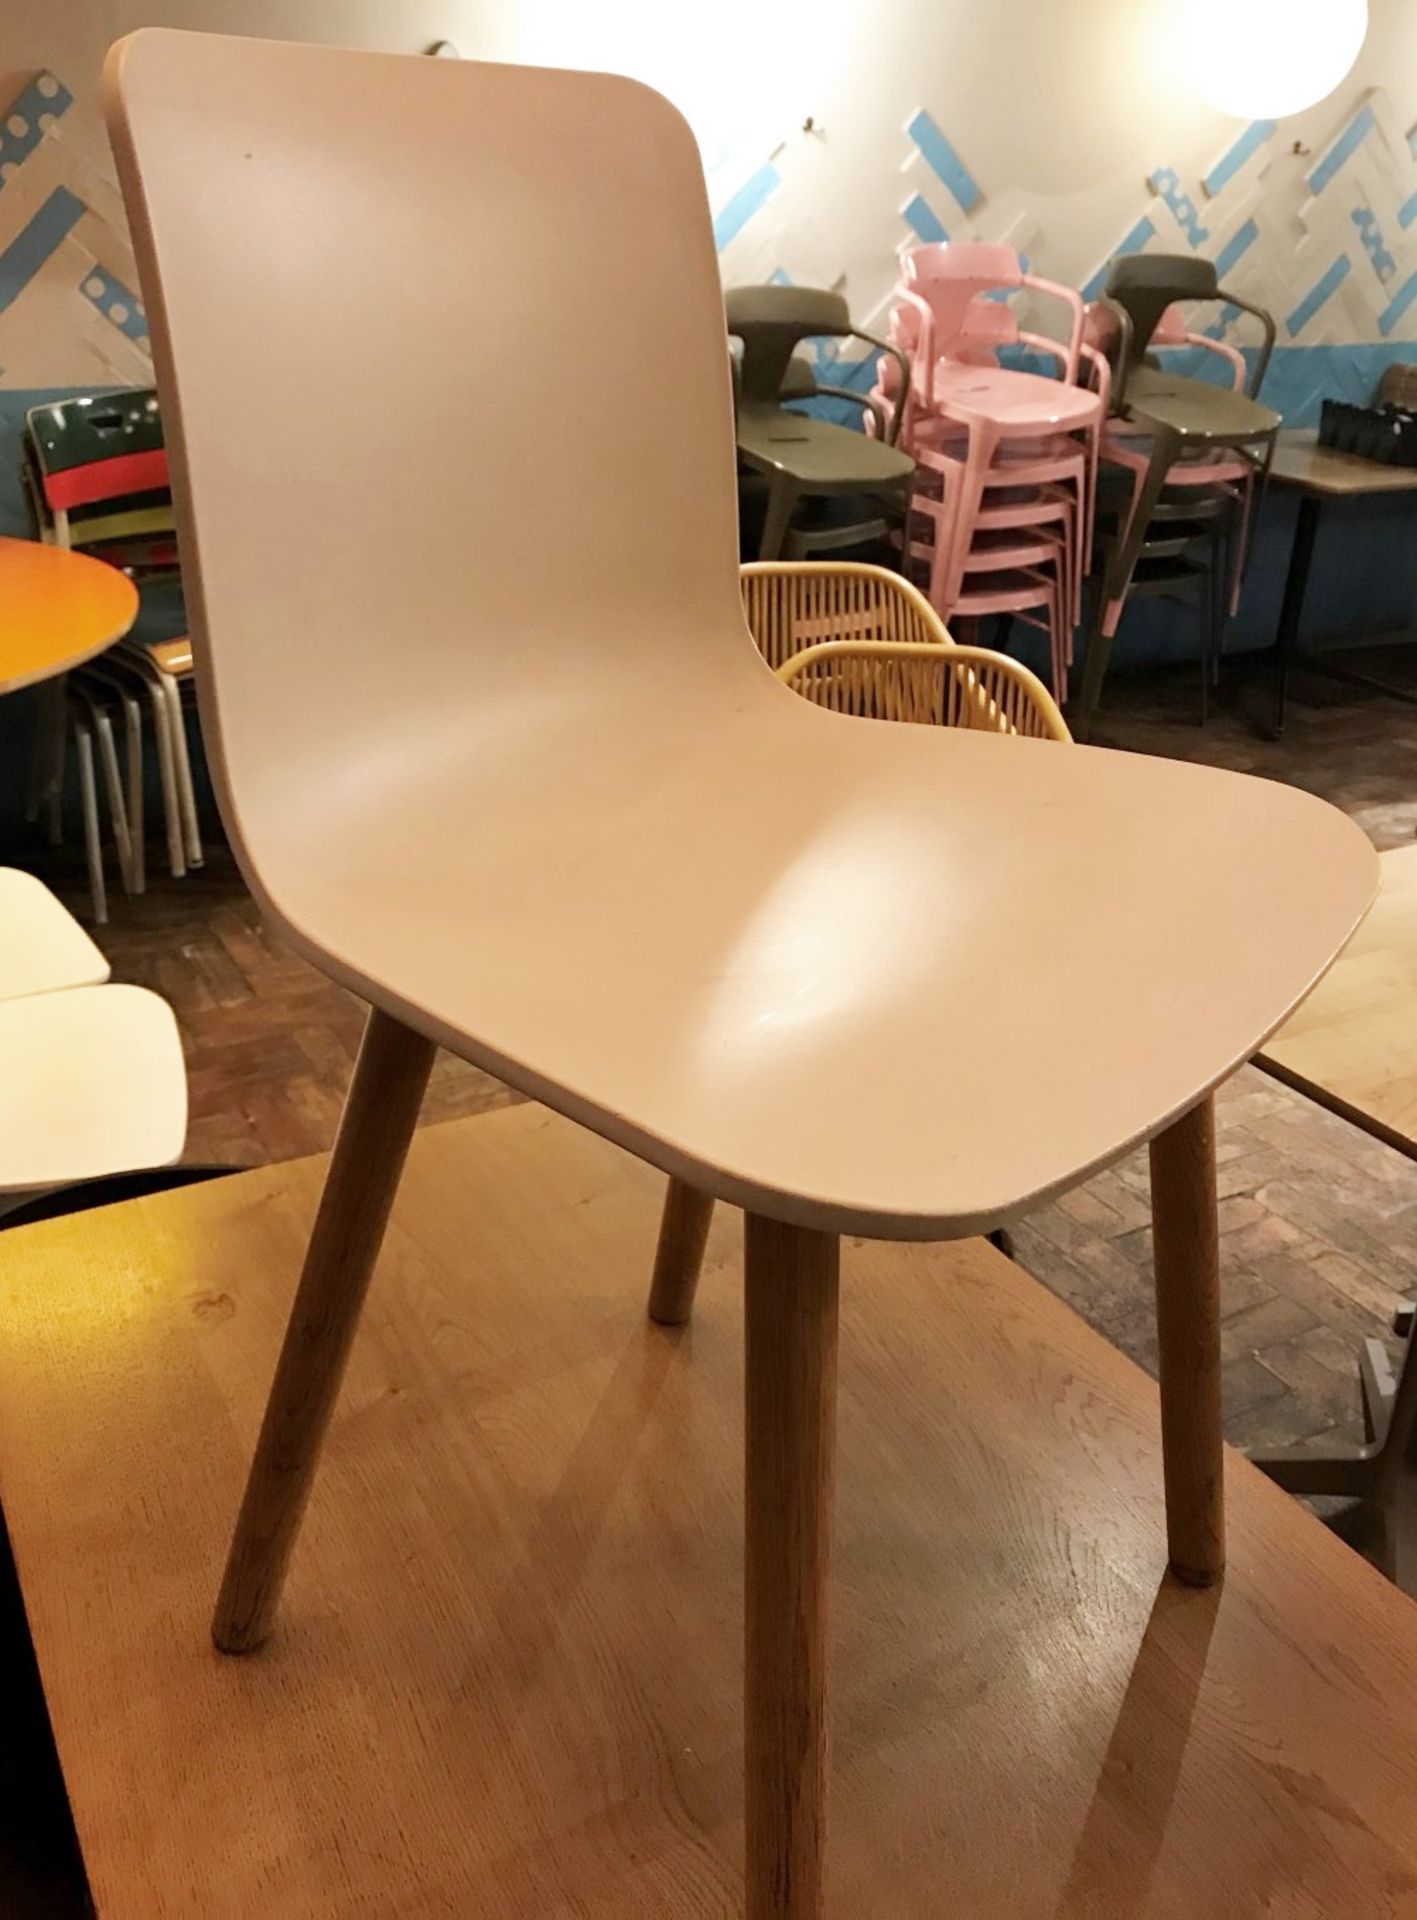 4 x VITRA 'HAL'  Chairs With Wooden Legs and White Seats - CL554 - Ref IM237 - WH3 - Location: - Image 3 of 3